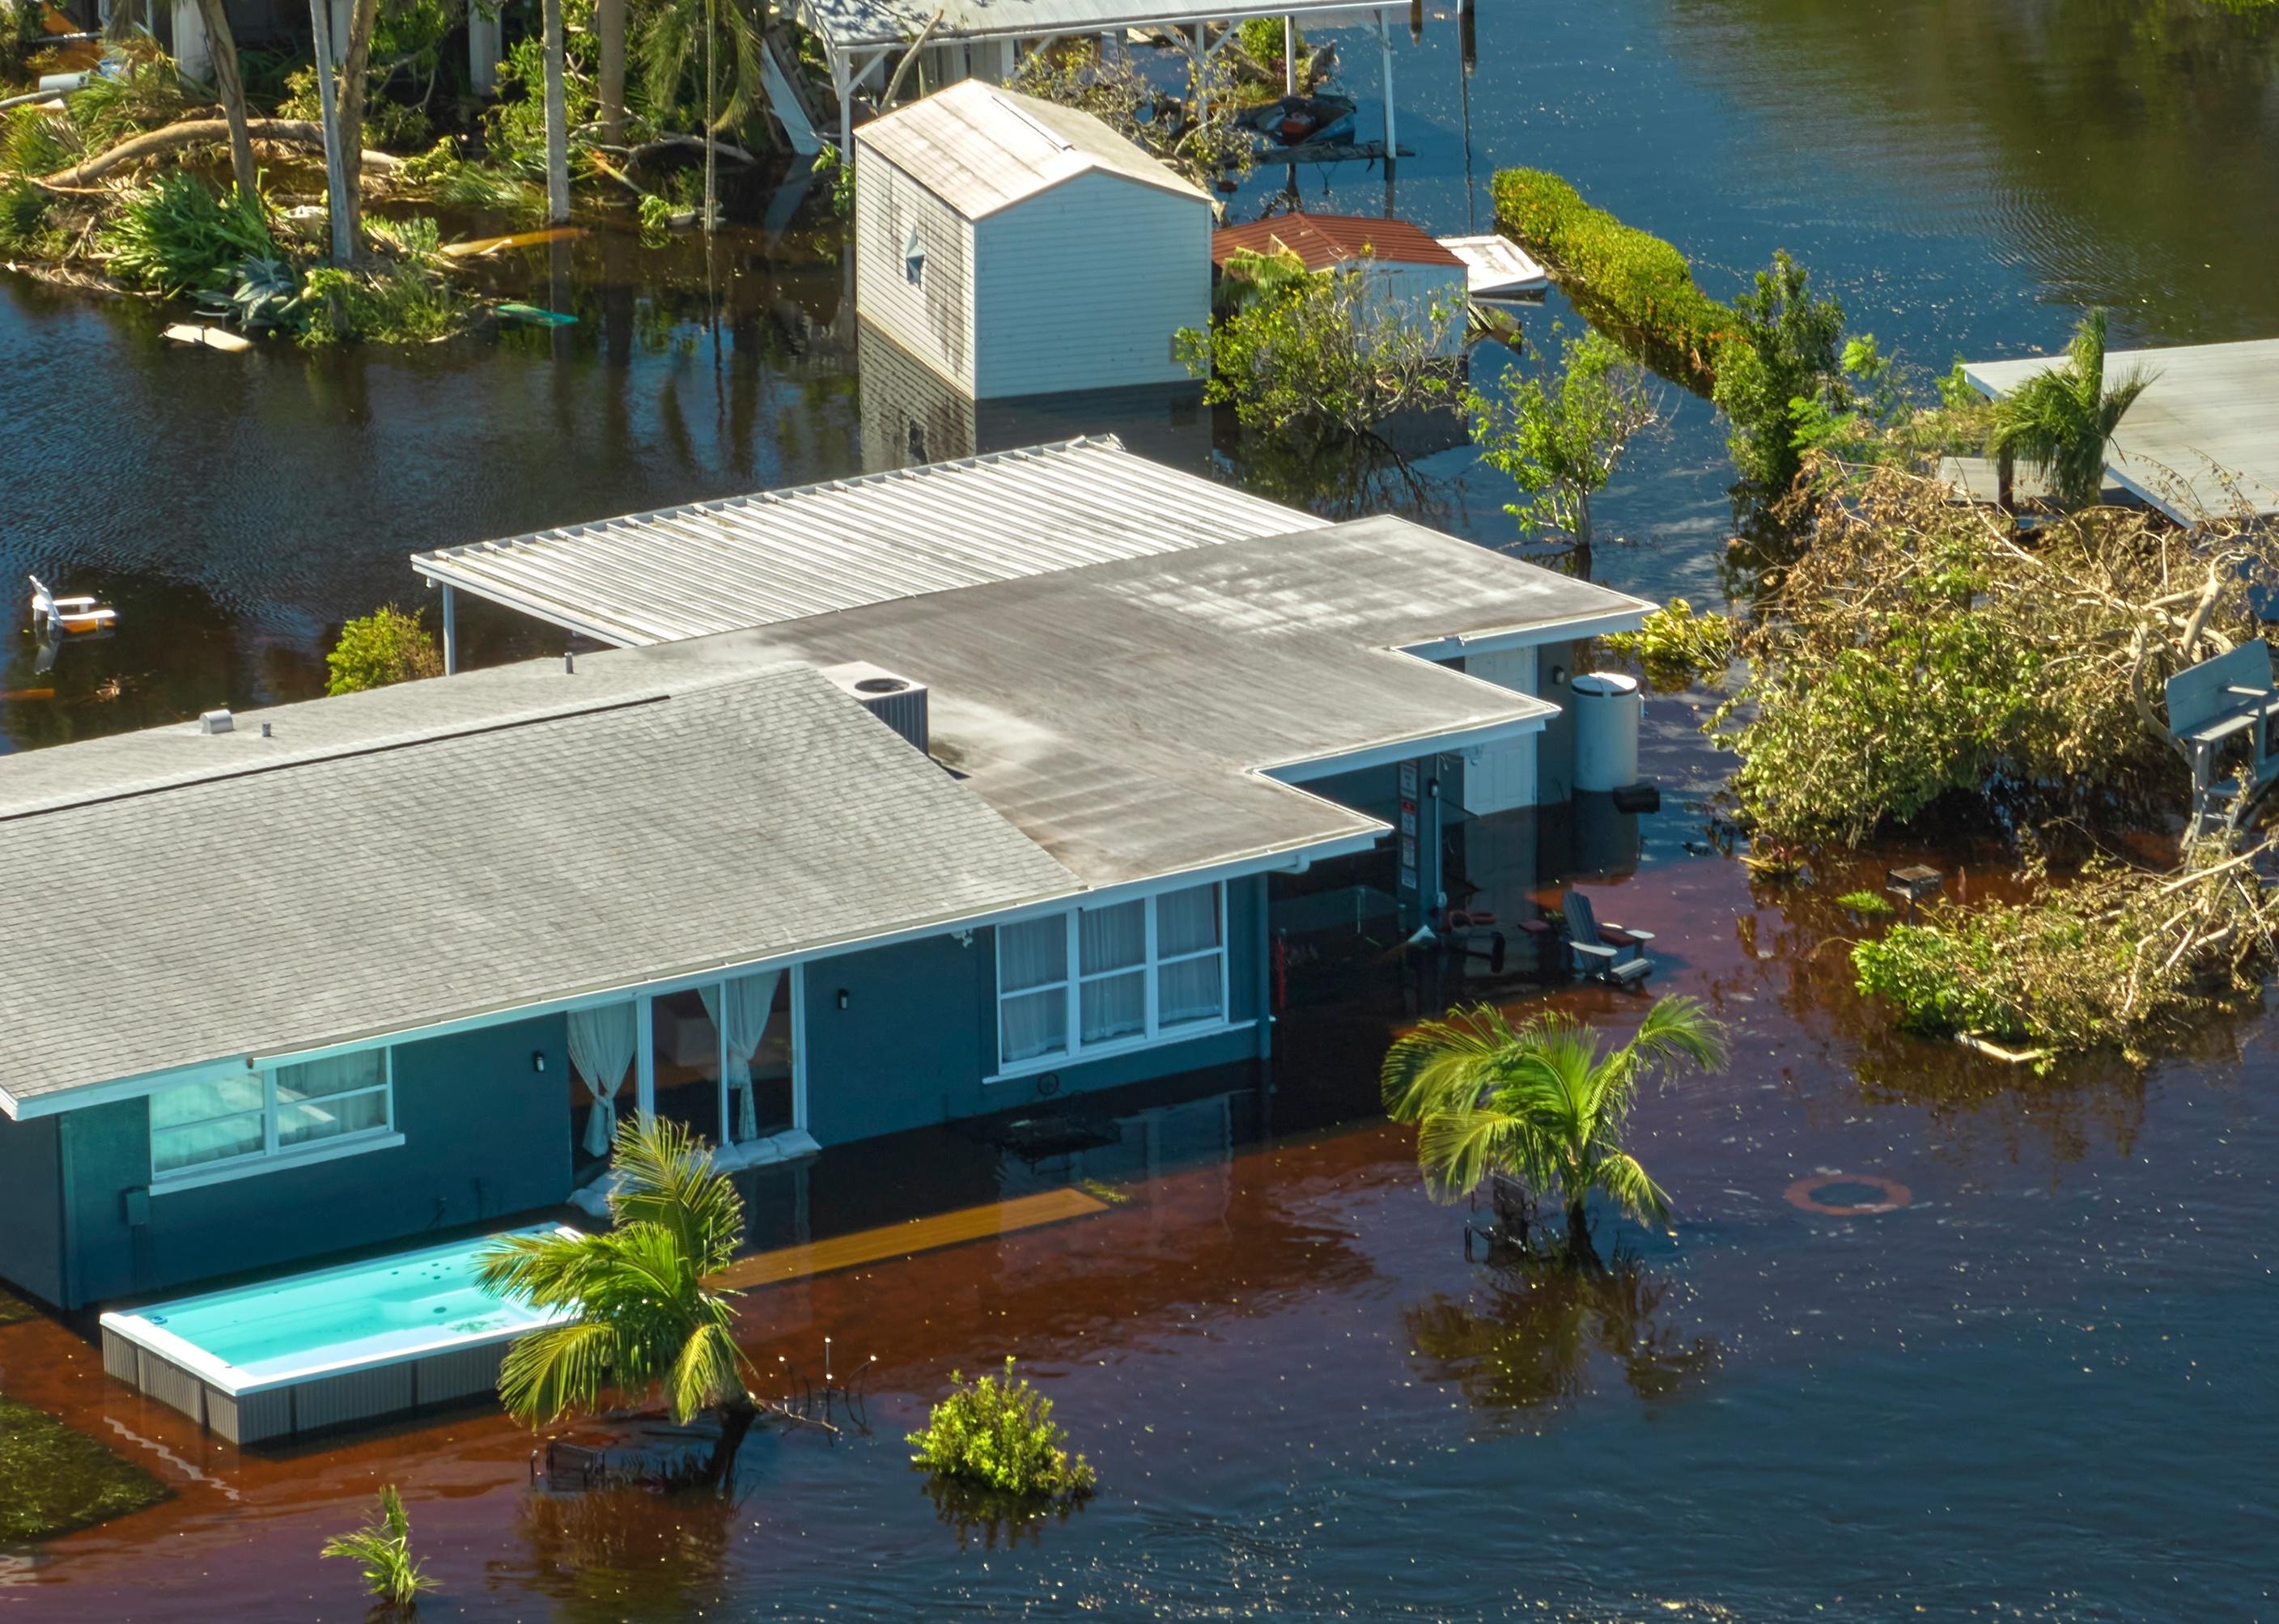 Flooded house by hurricane Ian rainfall in Florida residential area.